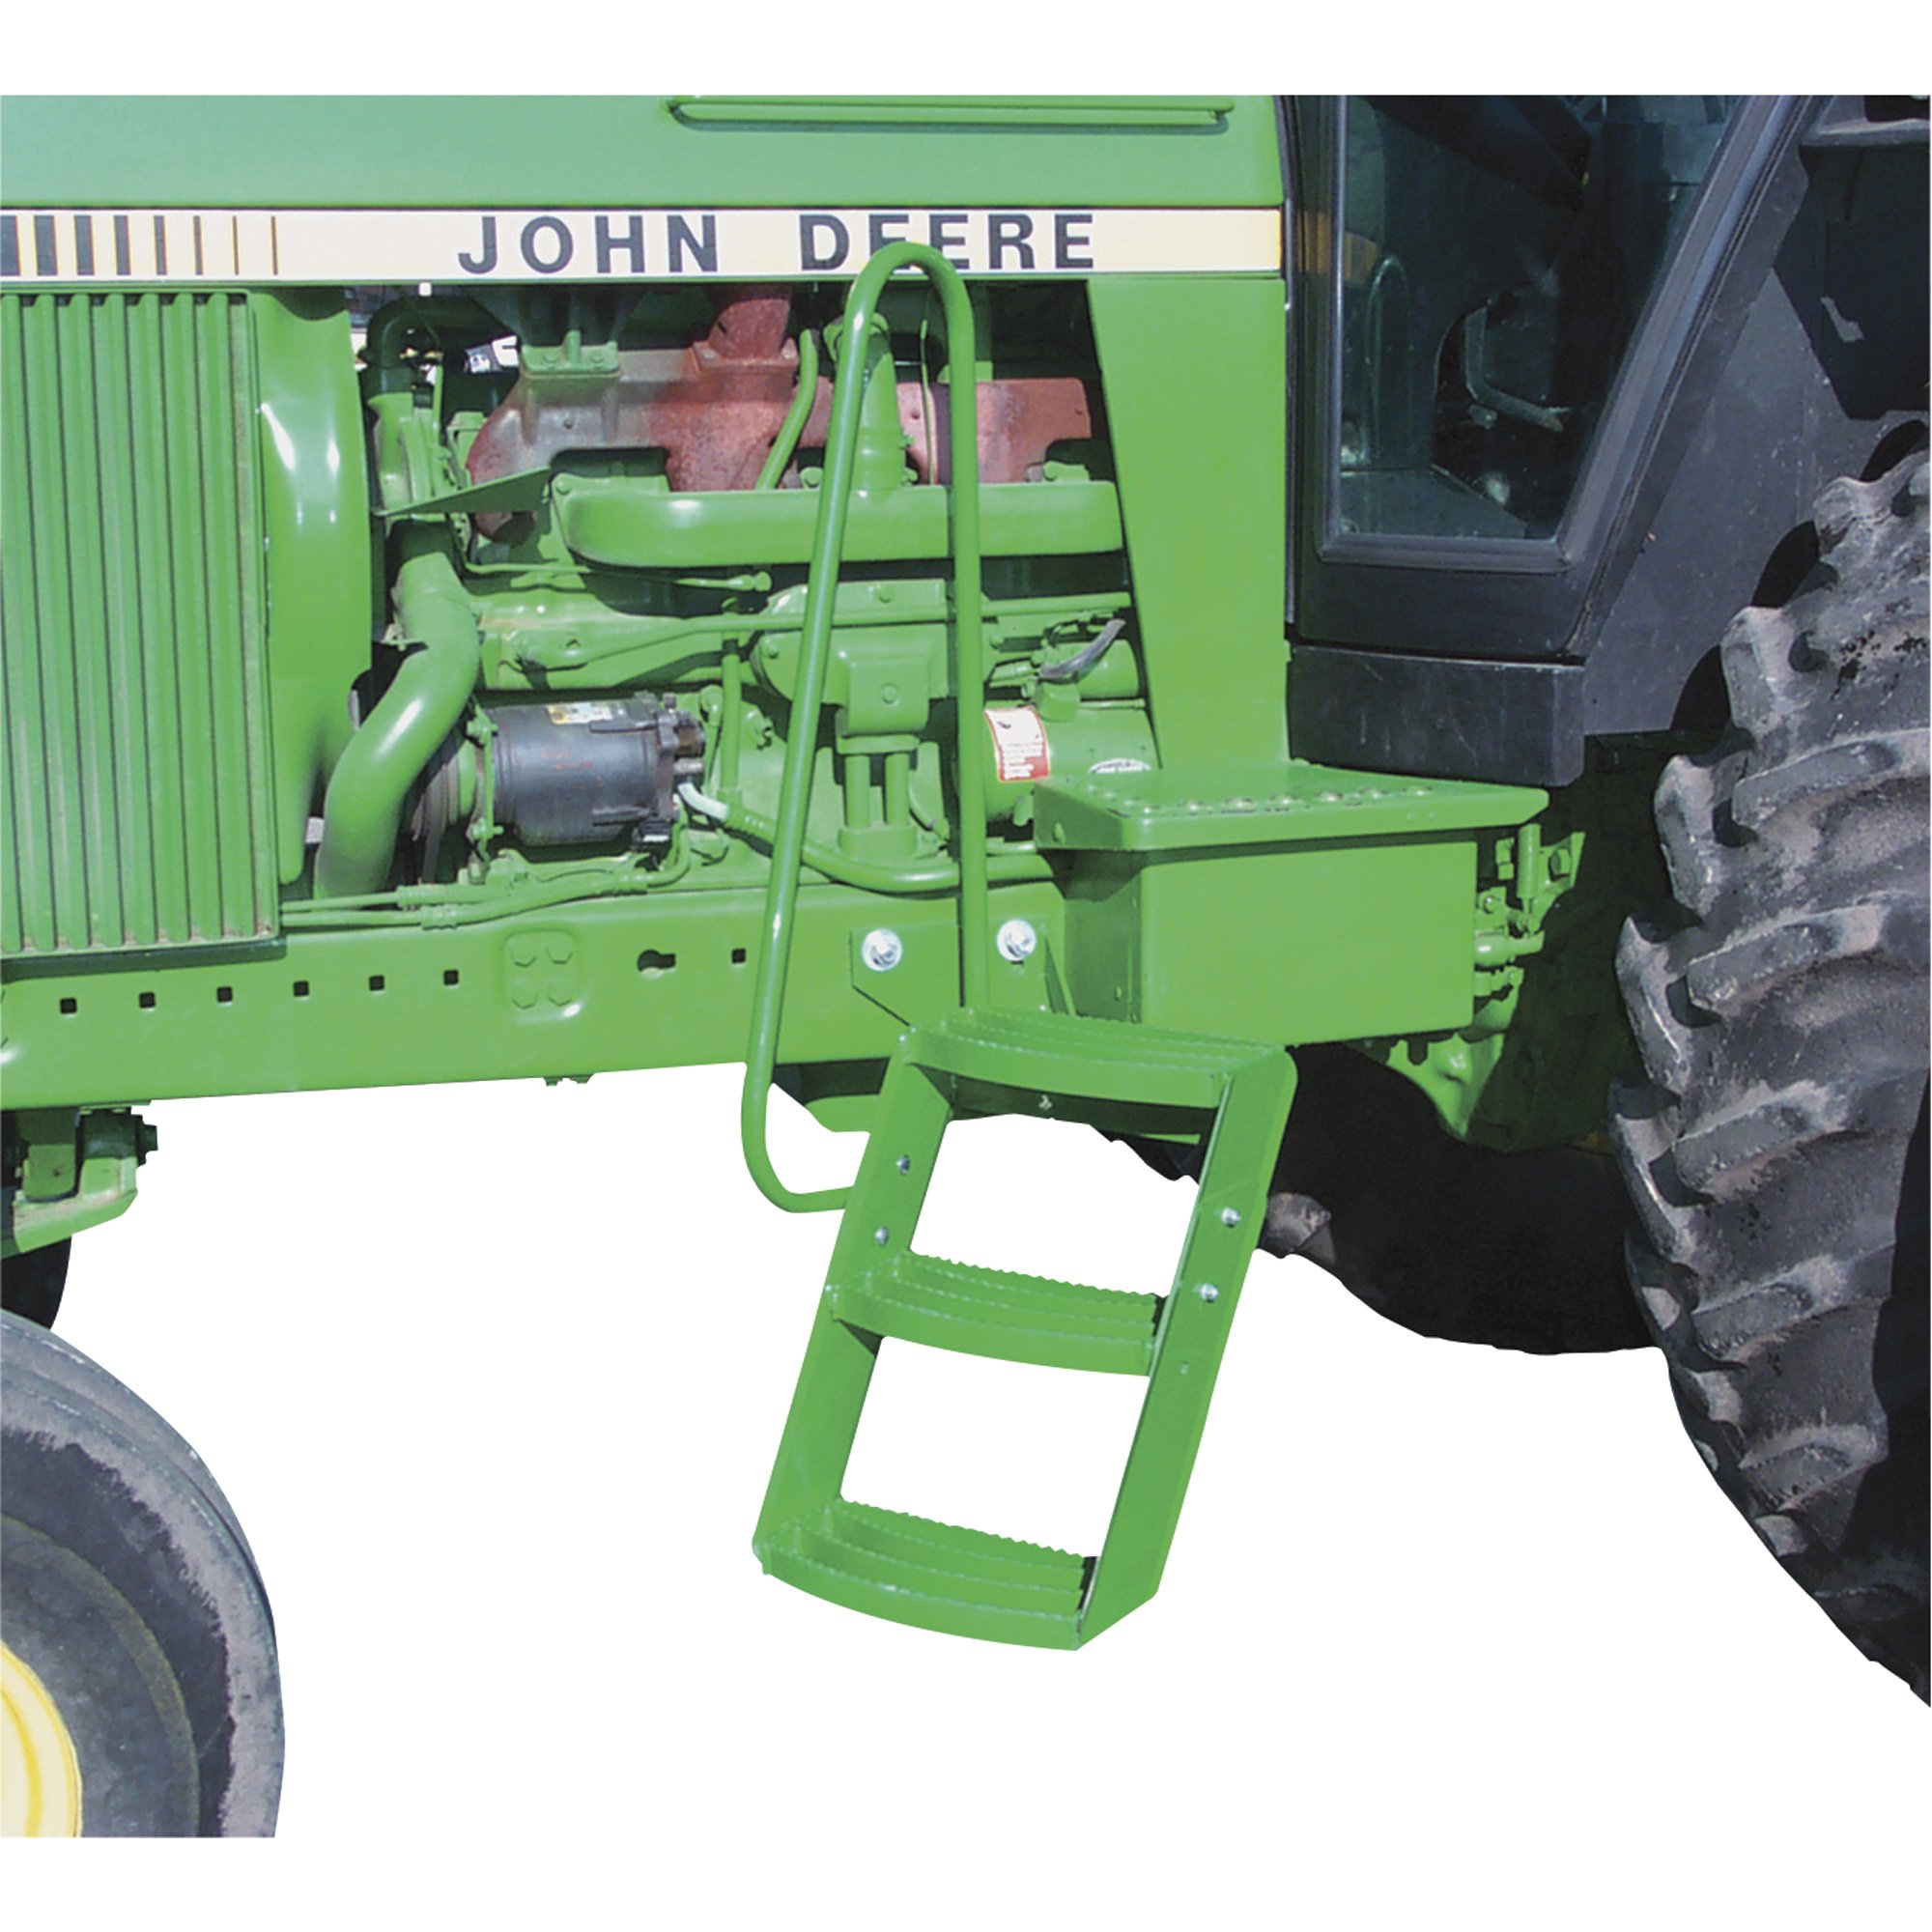 John Deere Tractor Step And Handrail Kit — For Series 10 20 30 40 And 50 Utility And Rowcrop 7161